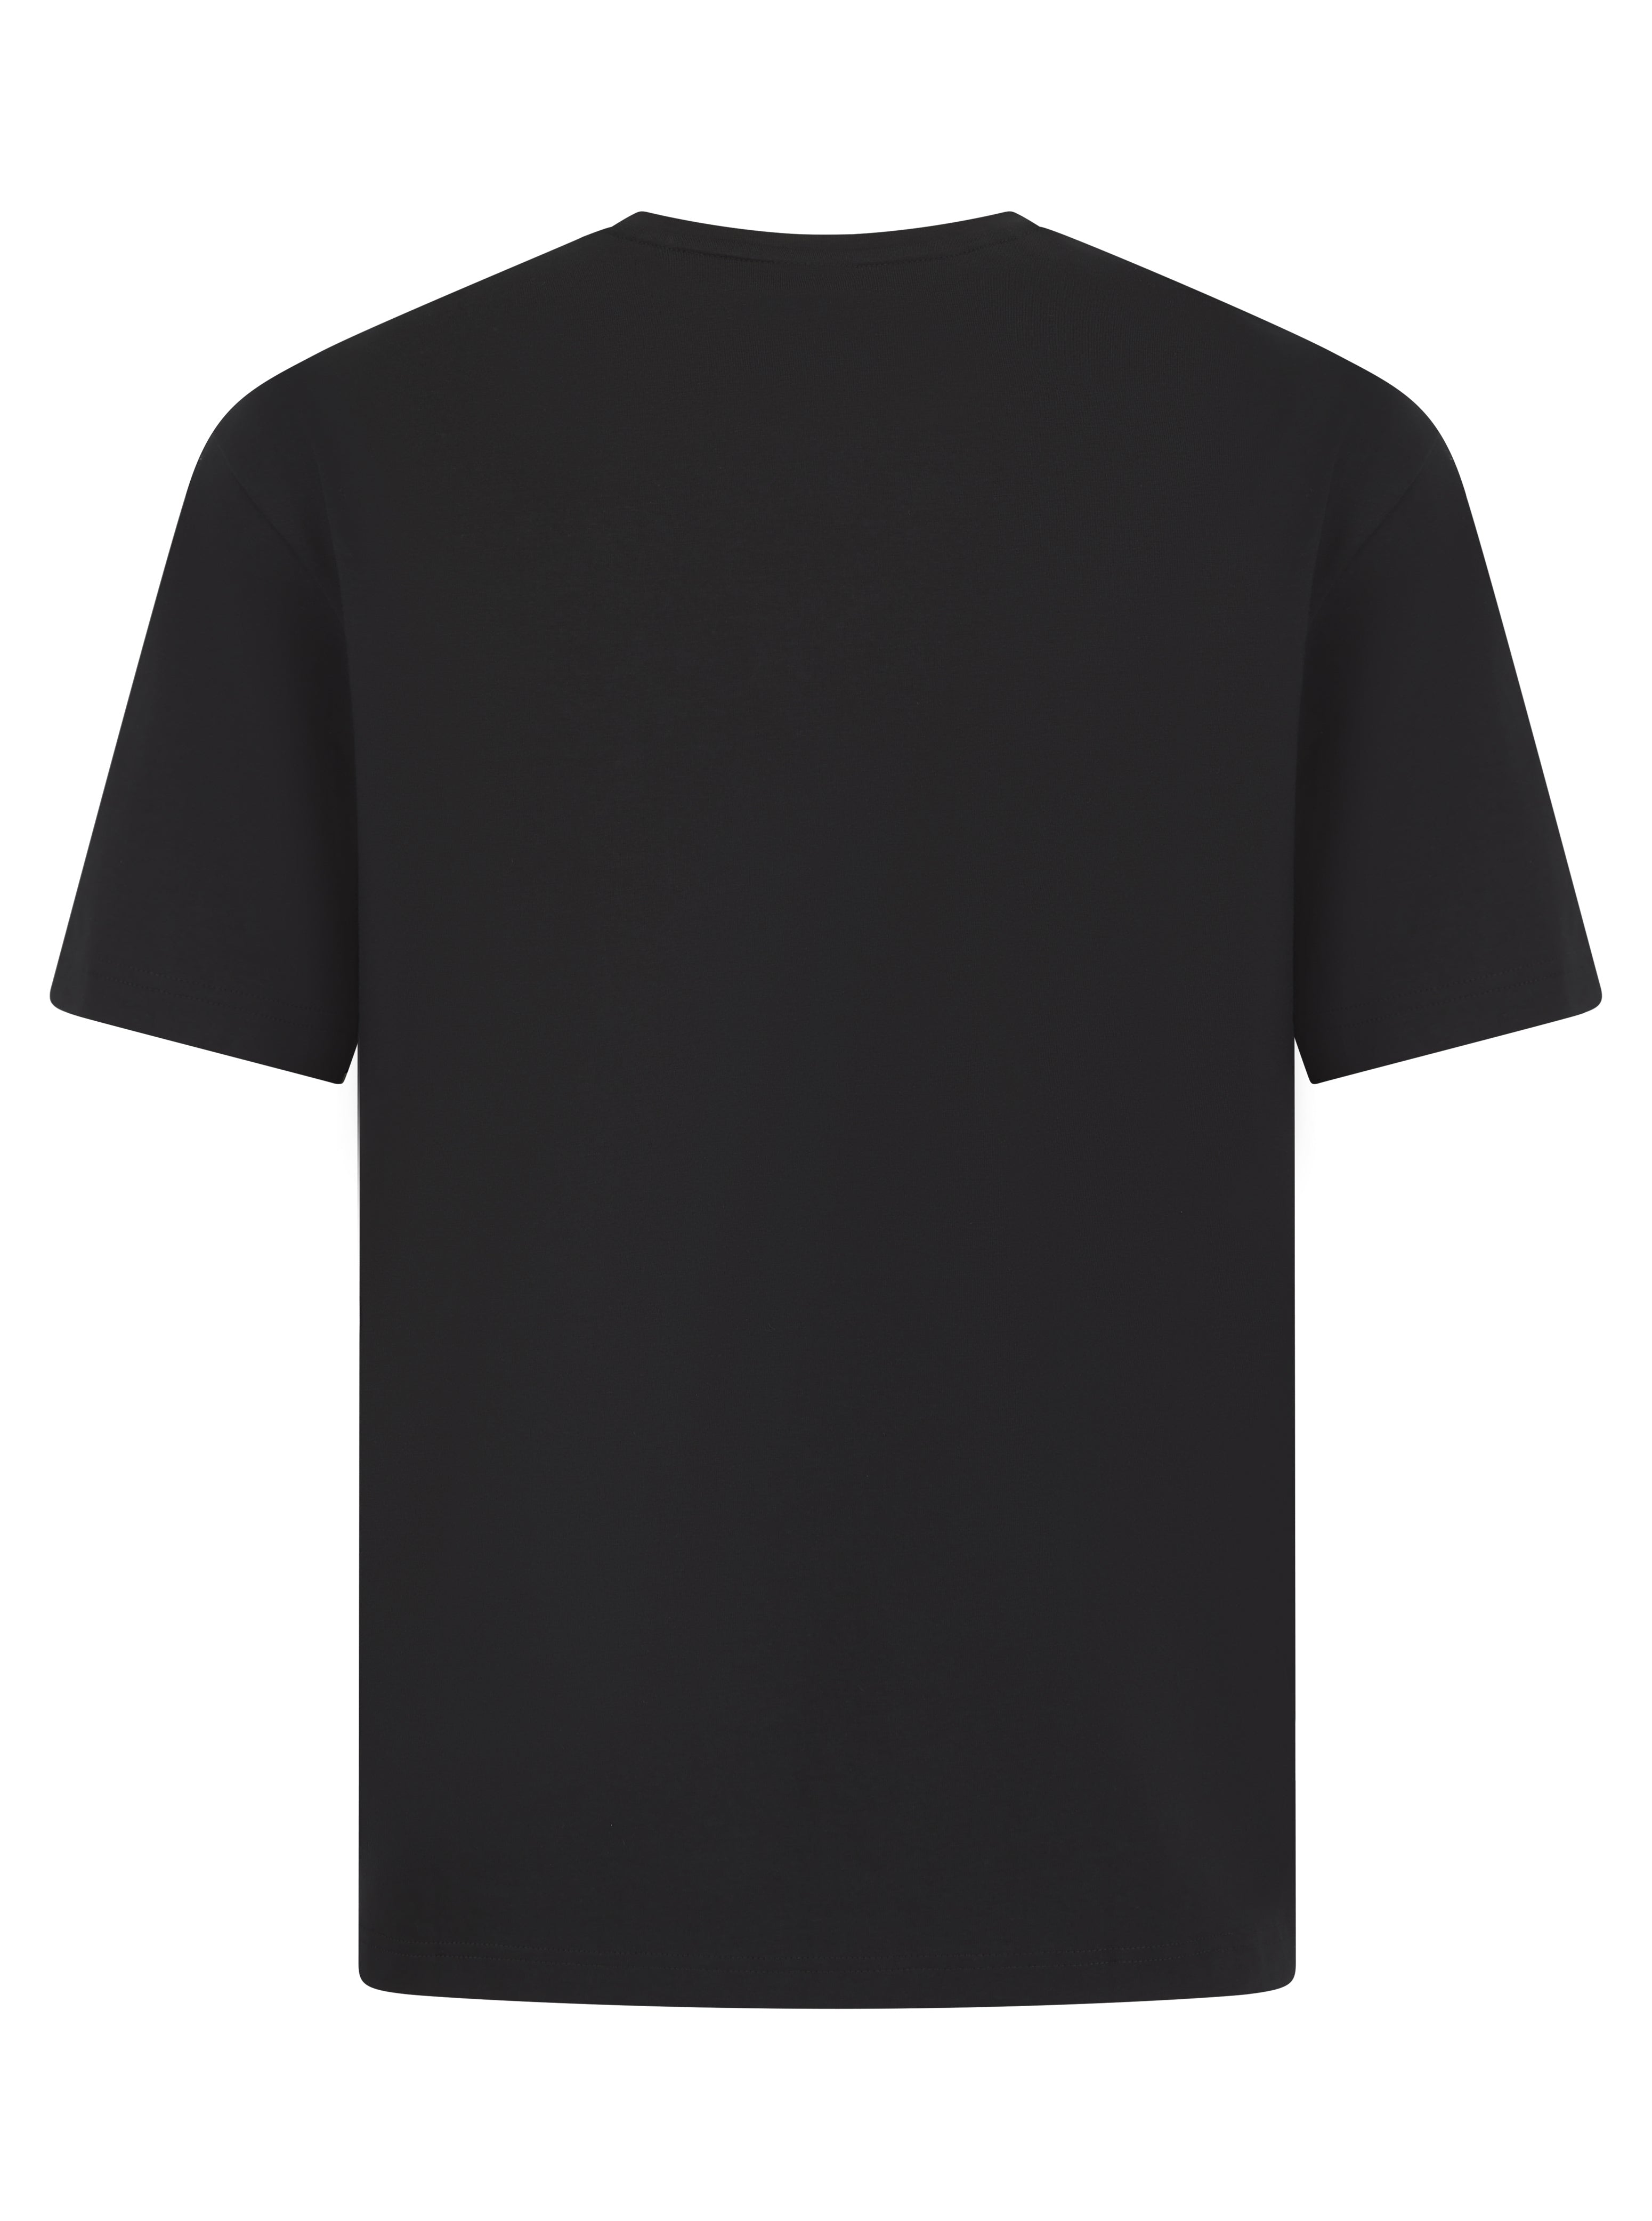 Load image into Gallery viewer, Jacob Cohen Circle Logo Tee Black
